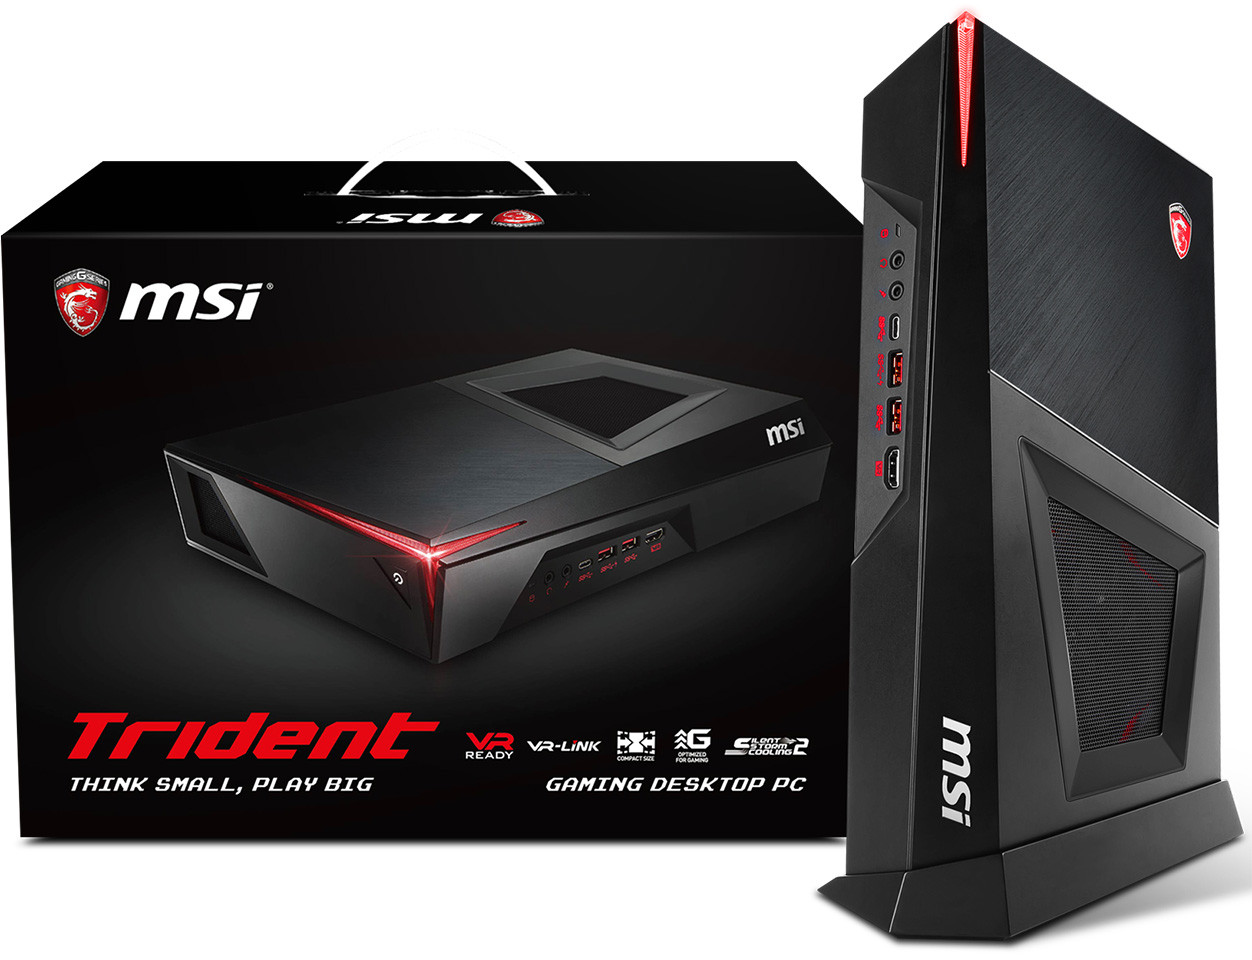 MSI launches Trident, a console sized gaming PC - NotebookCheck.net News